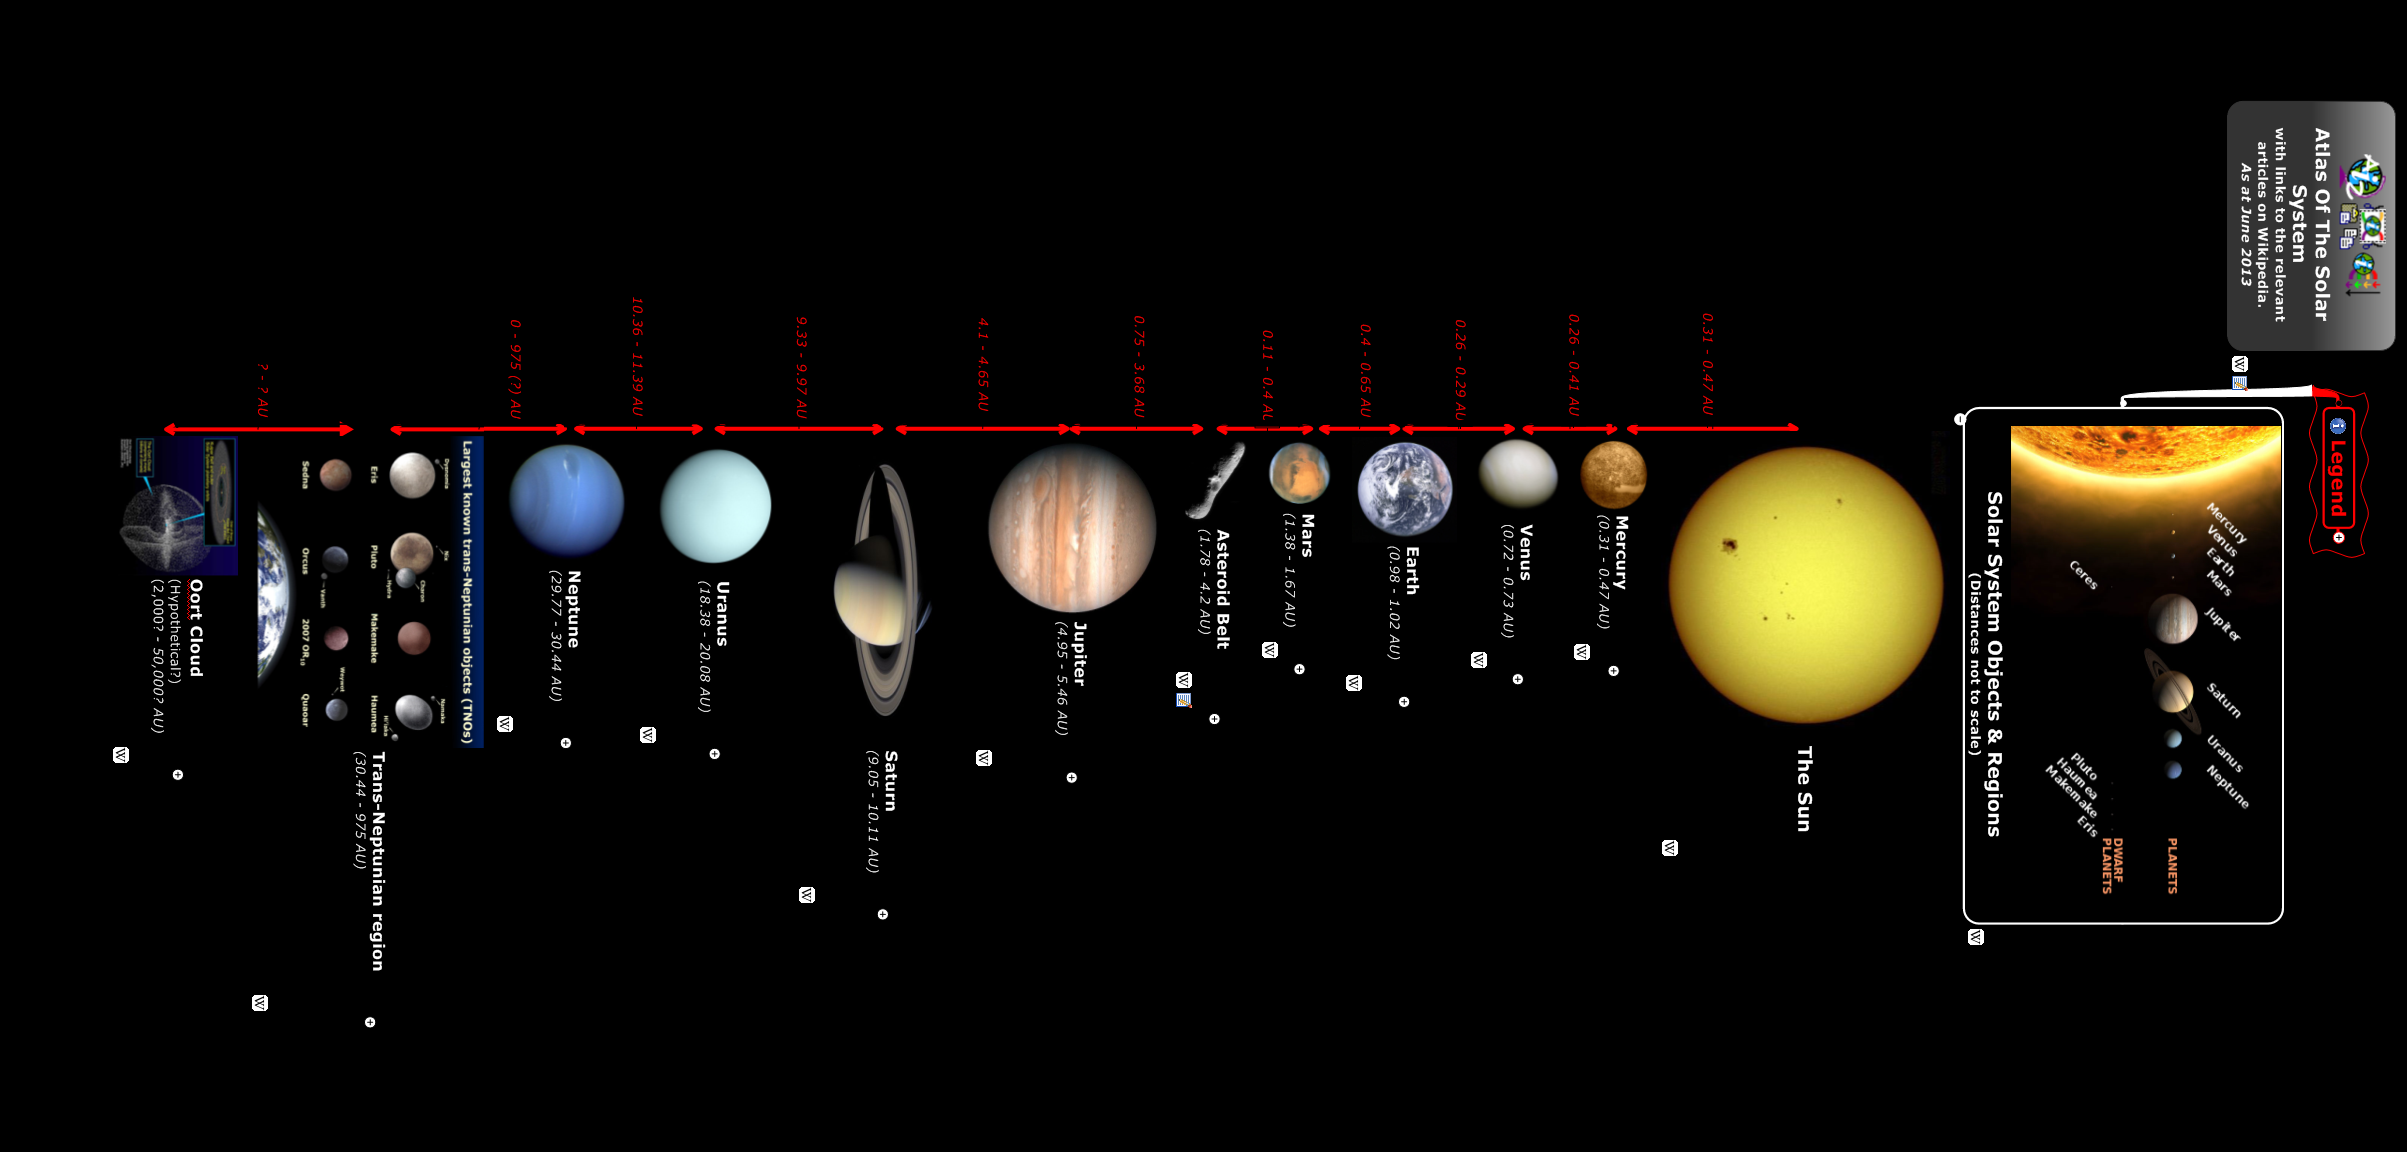 complete map of the solar system